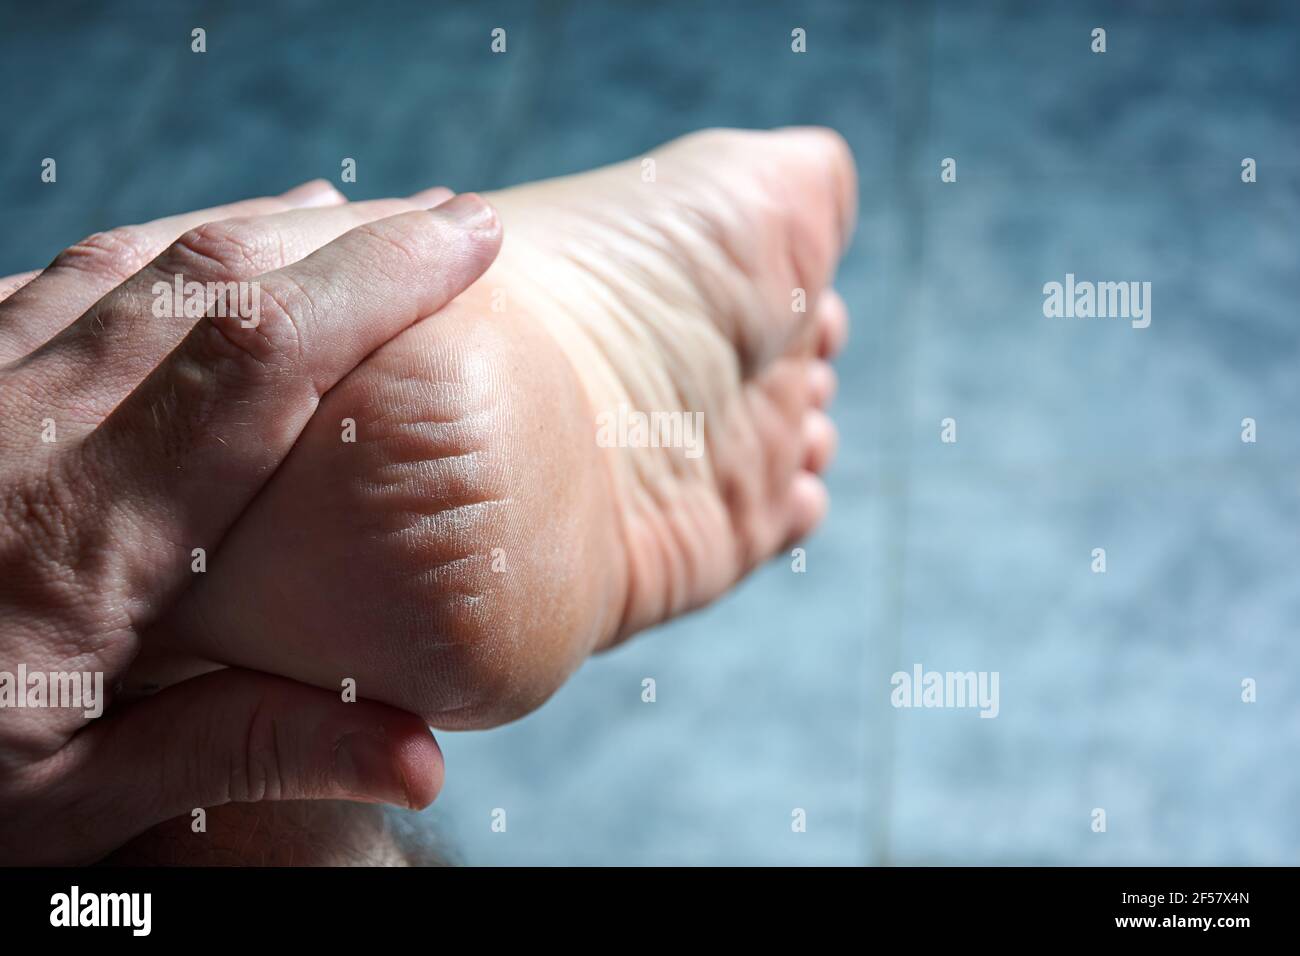 Young caucasian man's hand holding left foot showing cracked heel. Bad skin covered with cracks. Concept of feet care and body health. Stock Photo